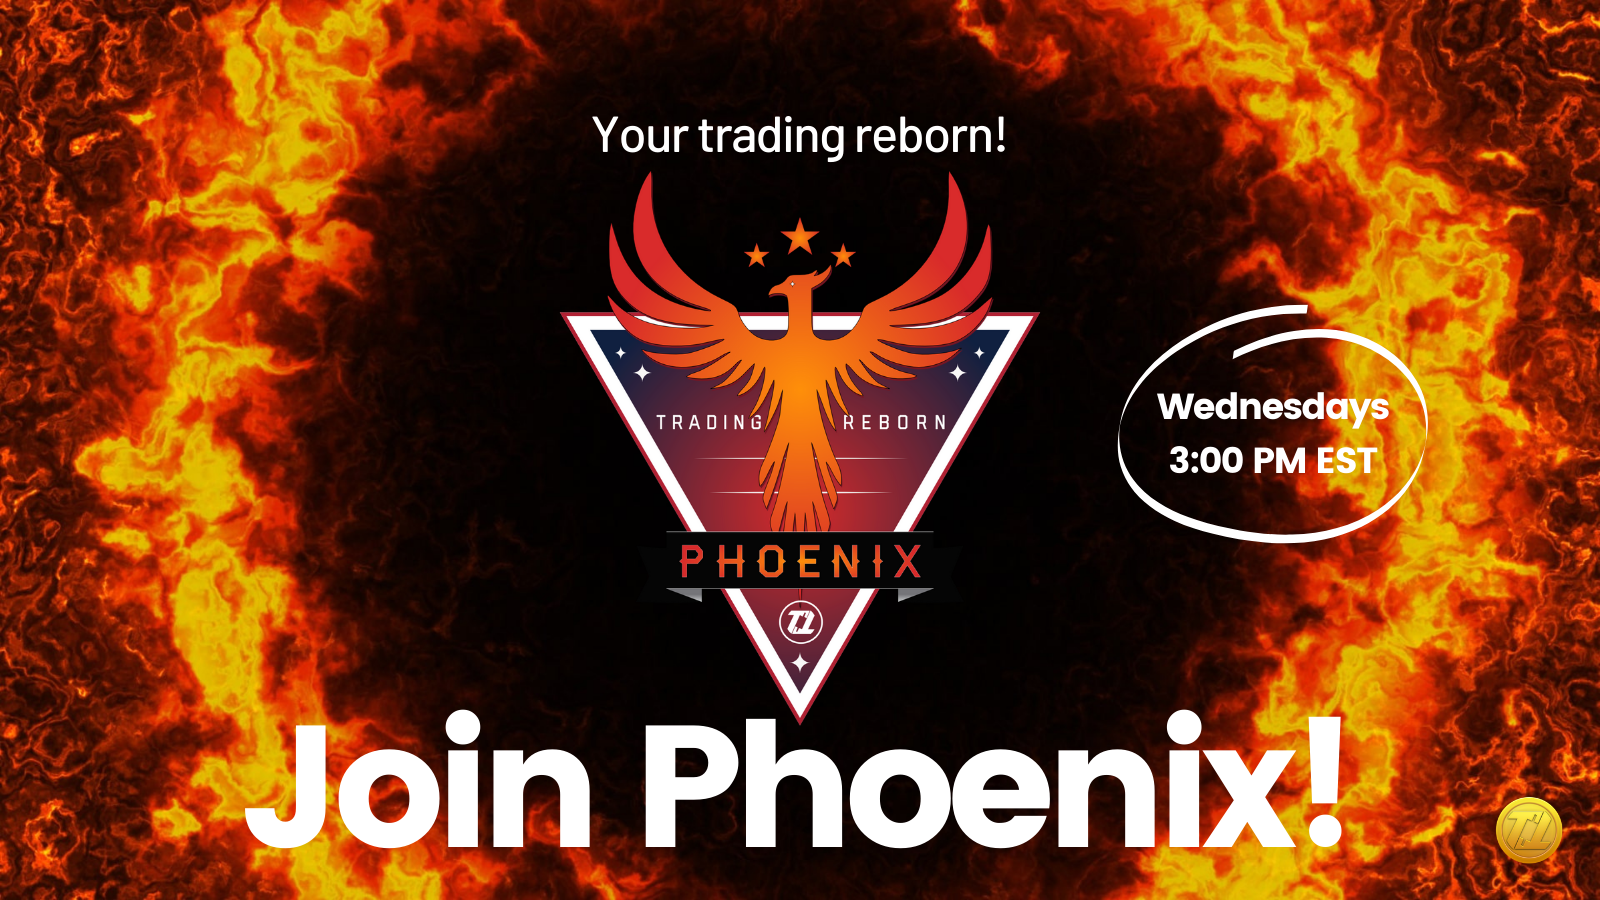 Join Phoenix. Click on the image to get 15 days for free.